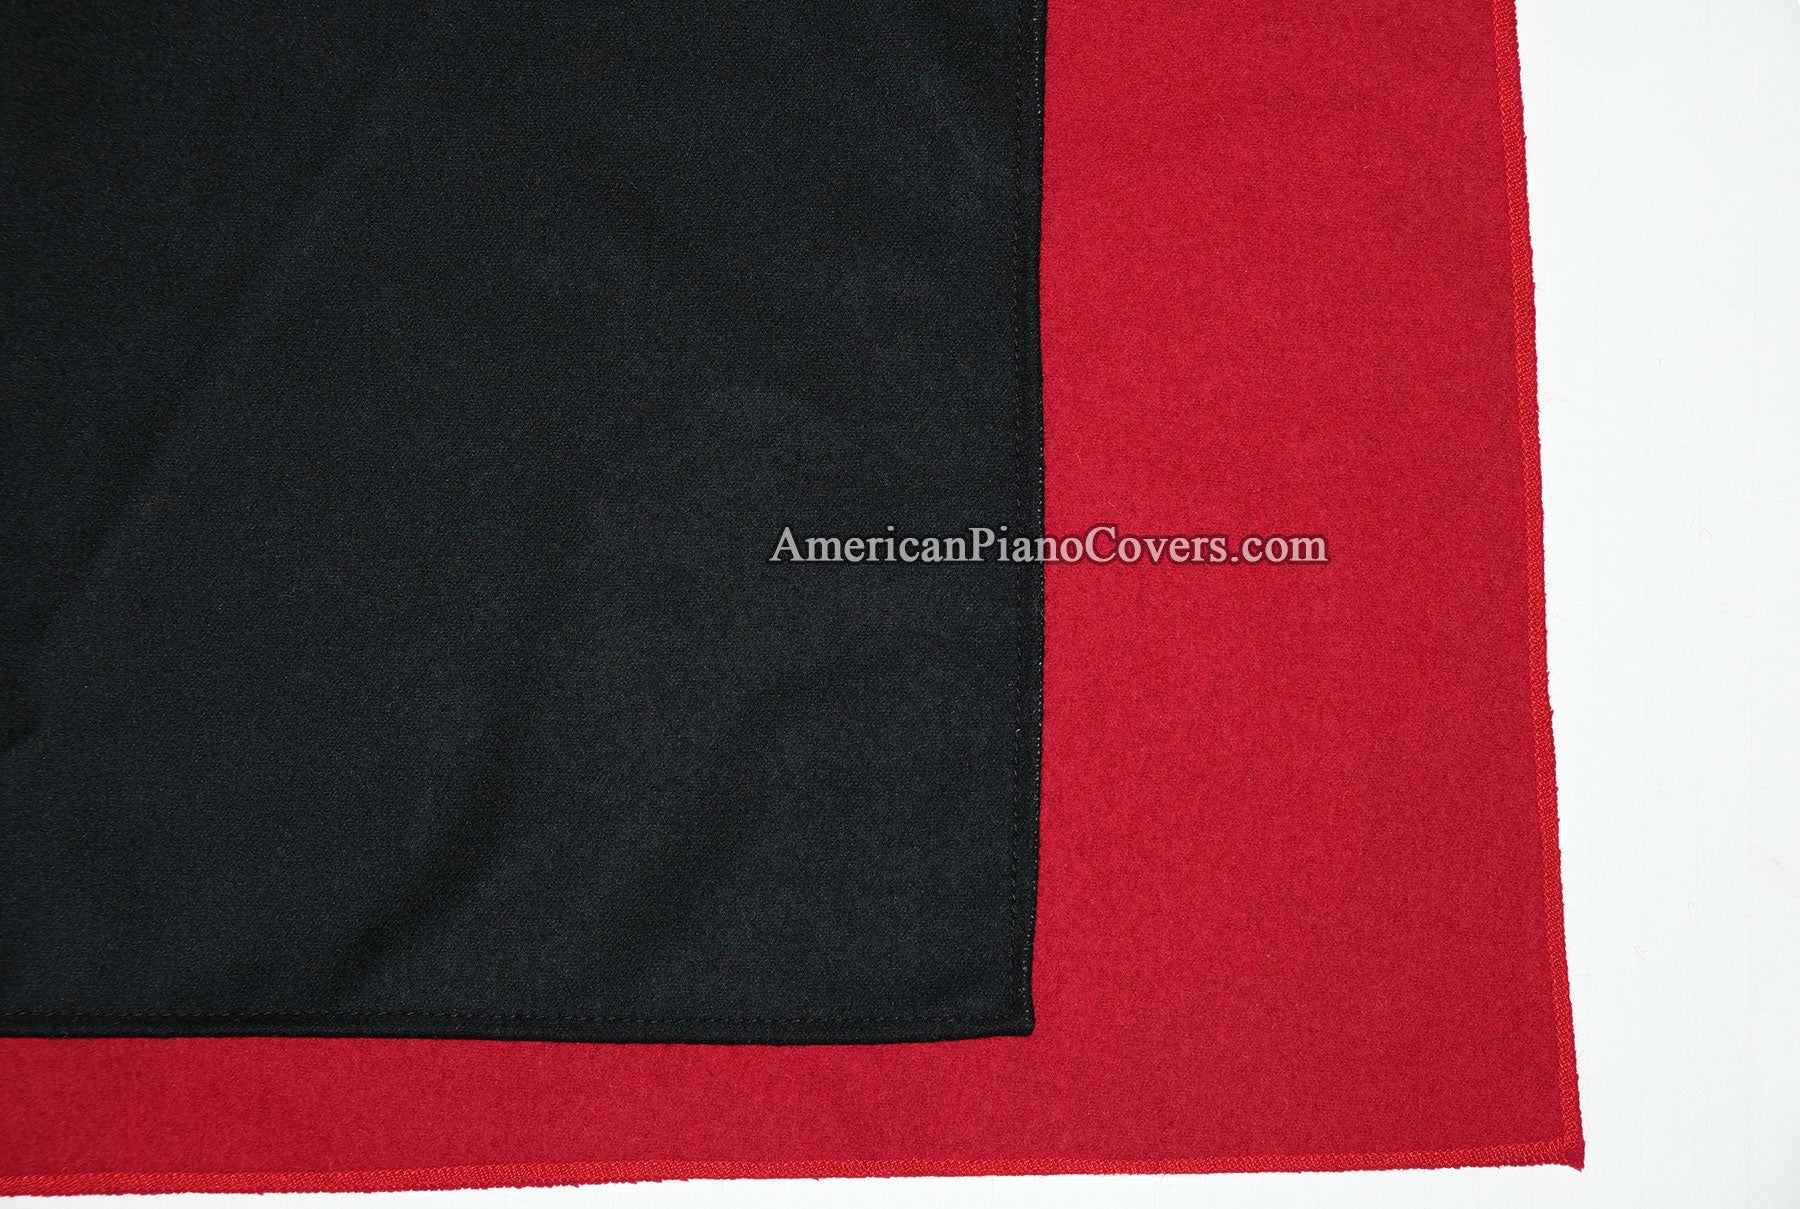 piano string cover material options red and black